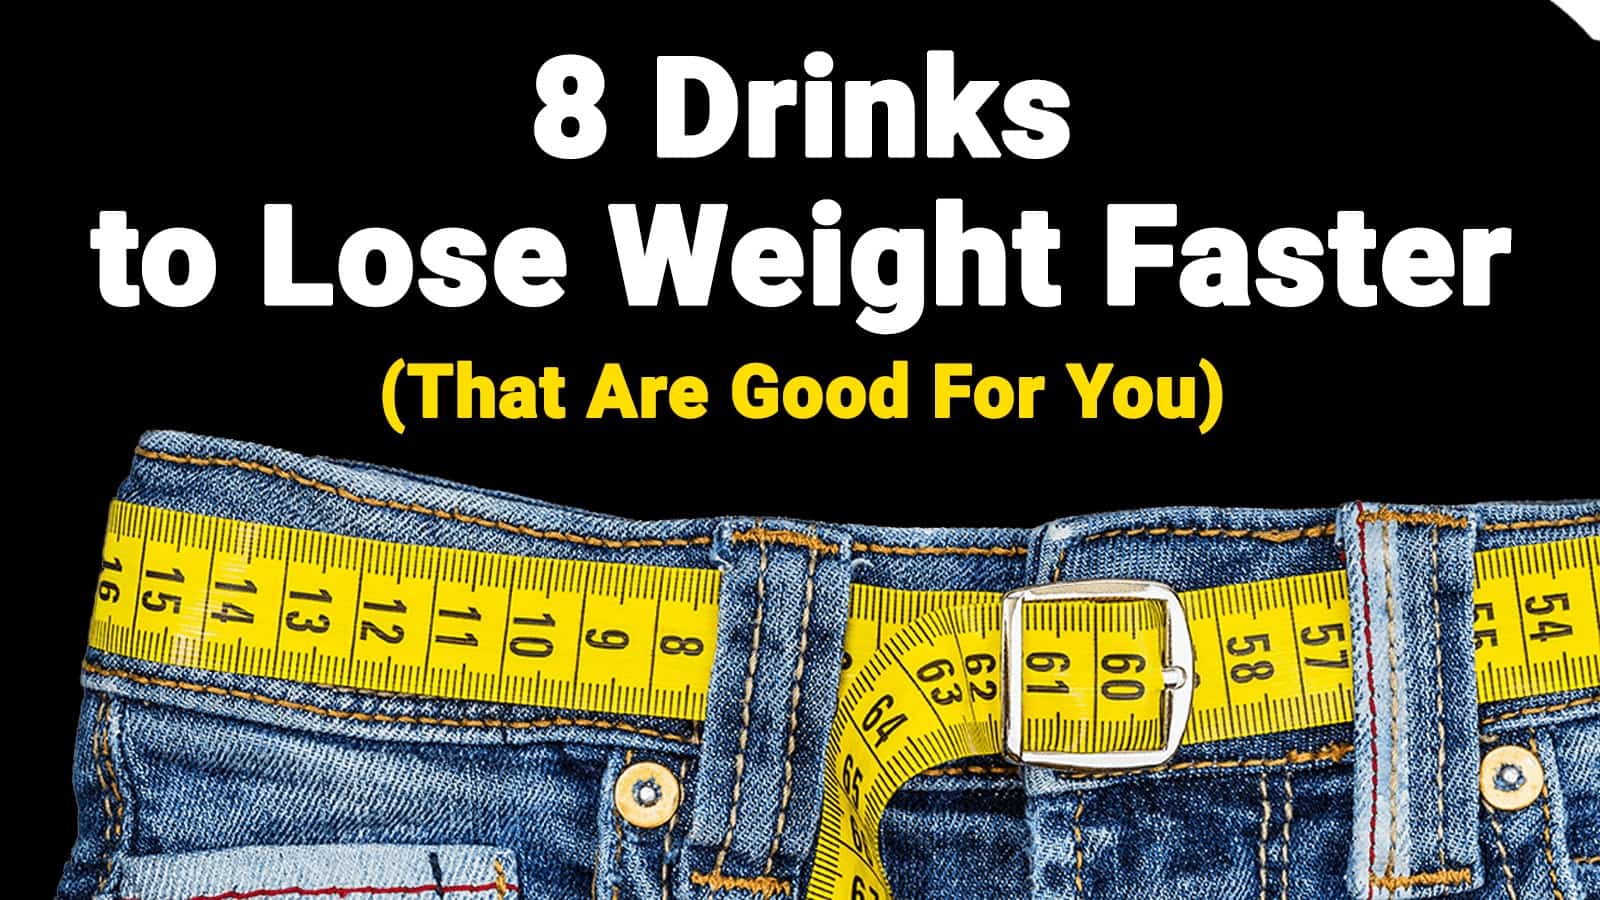 8 Drinks to Lose Weight Faster (That Are Good For You)